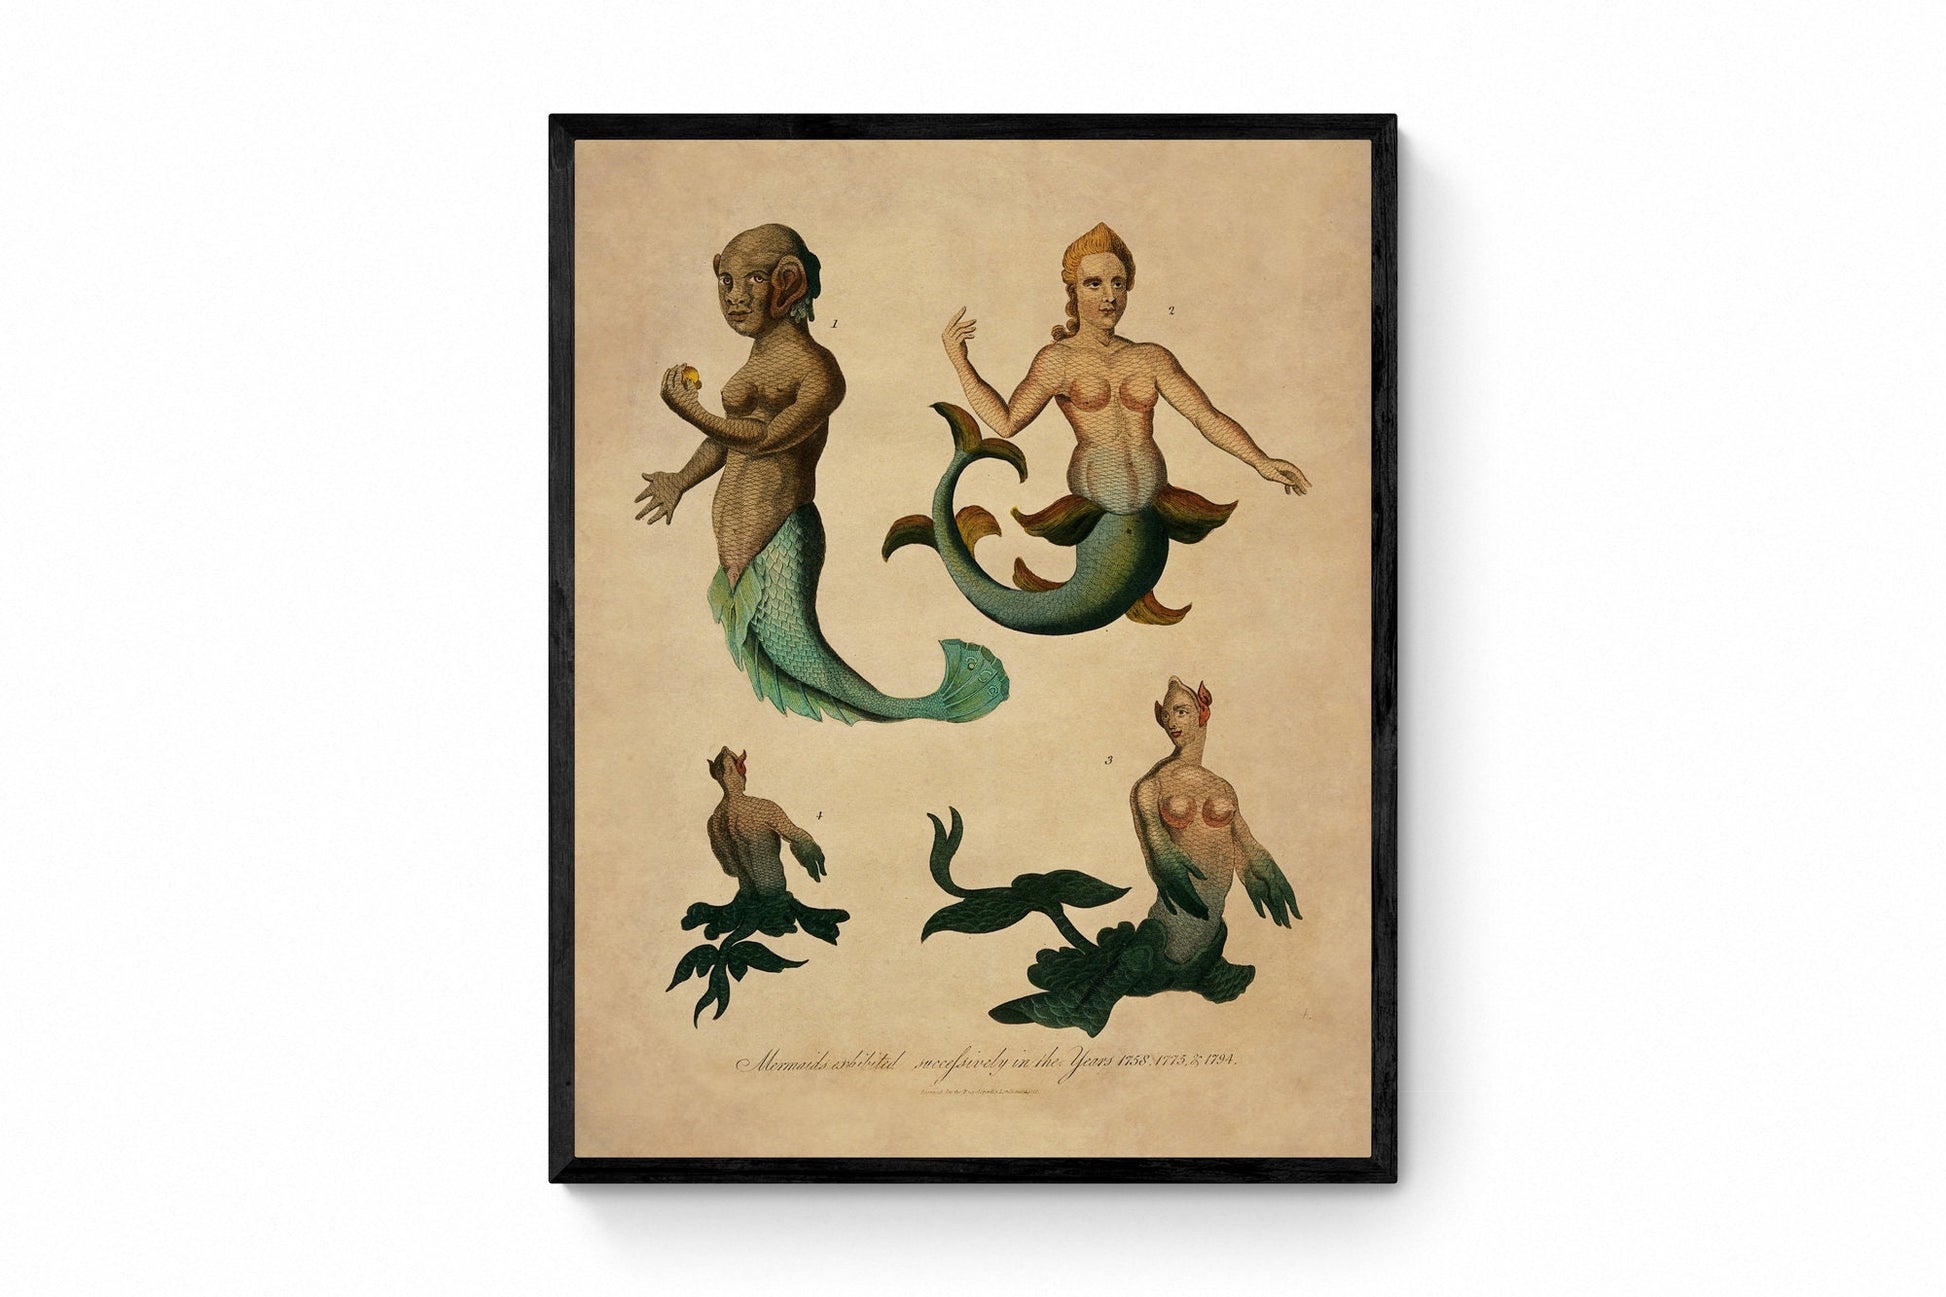 Mermaids exhibited successively in the years 1758,1775 and 1794 Antique Reproduction - Print dated 1817 - Available Framed